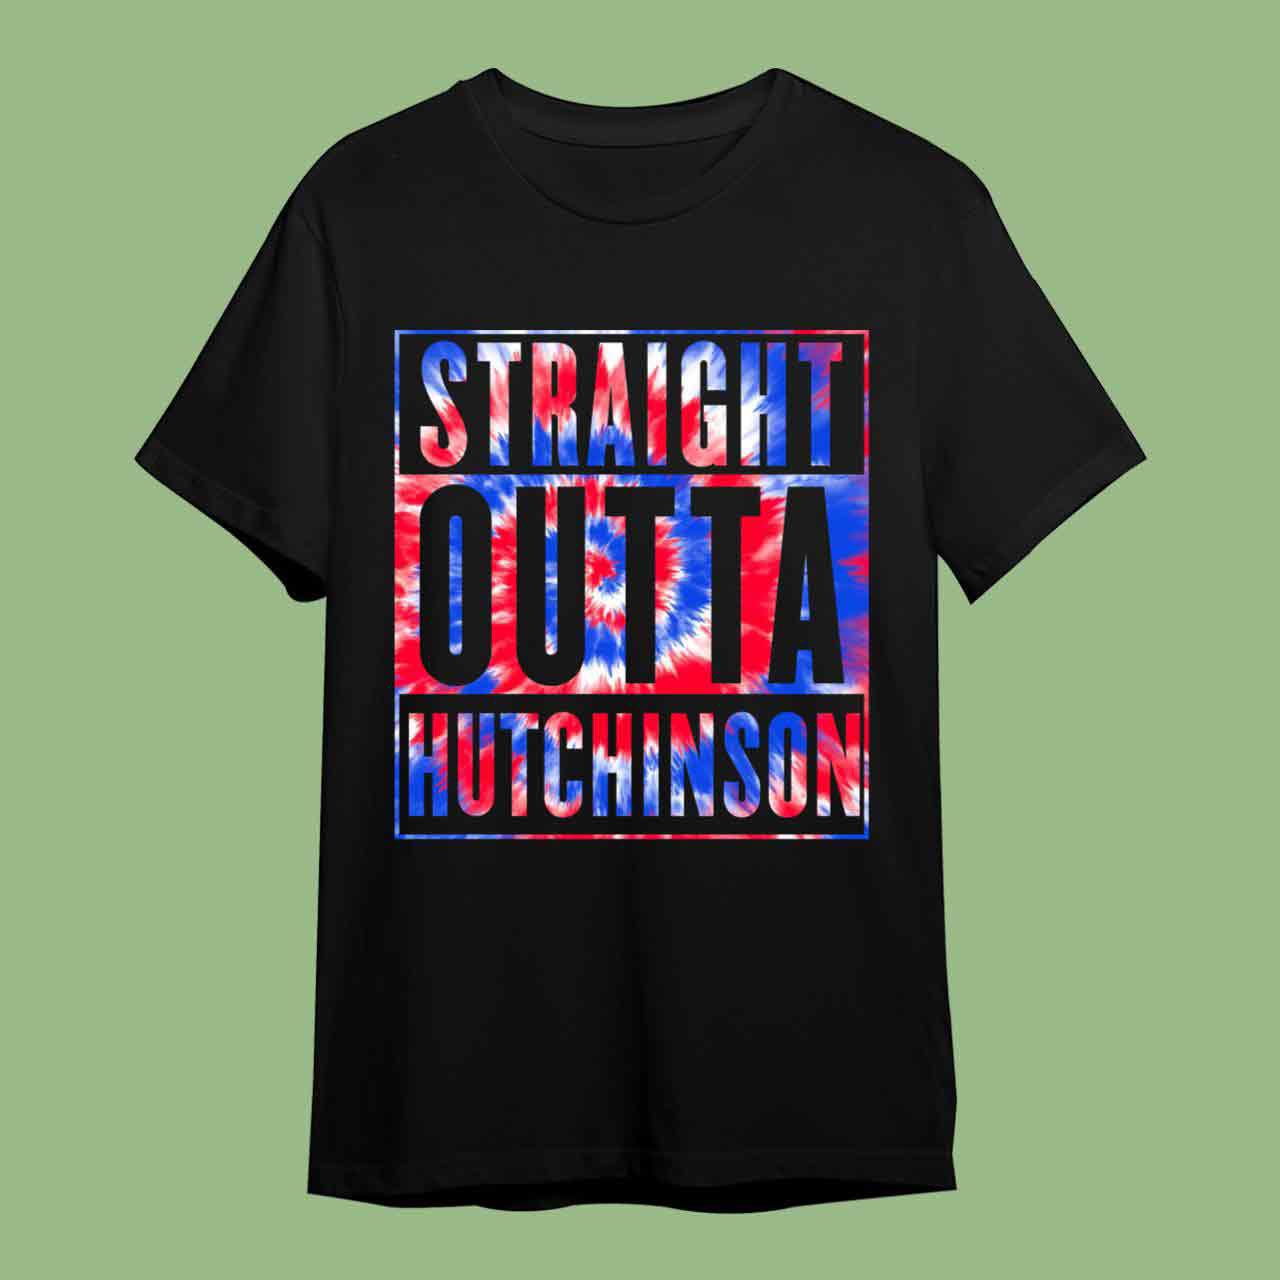 Straight Outta Cassidy Hutchison Tie Dye American Flag T-Shirt